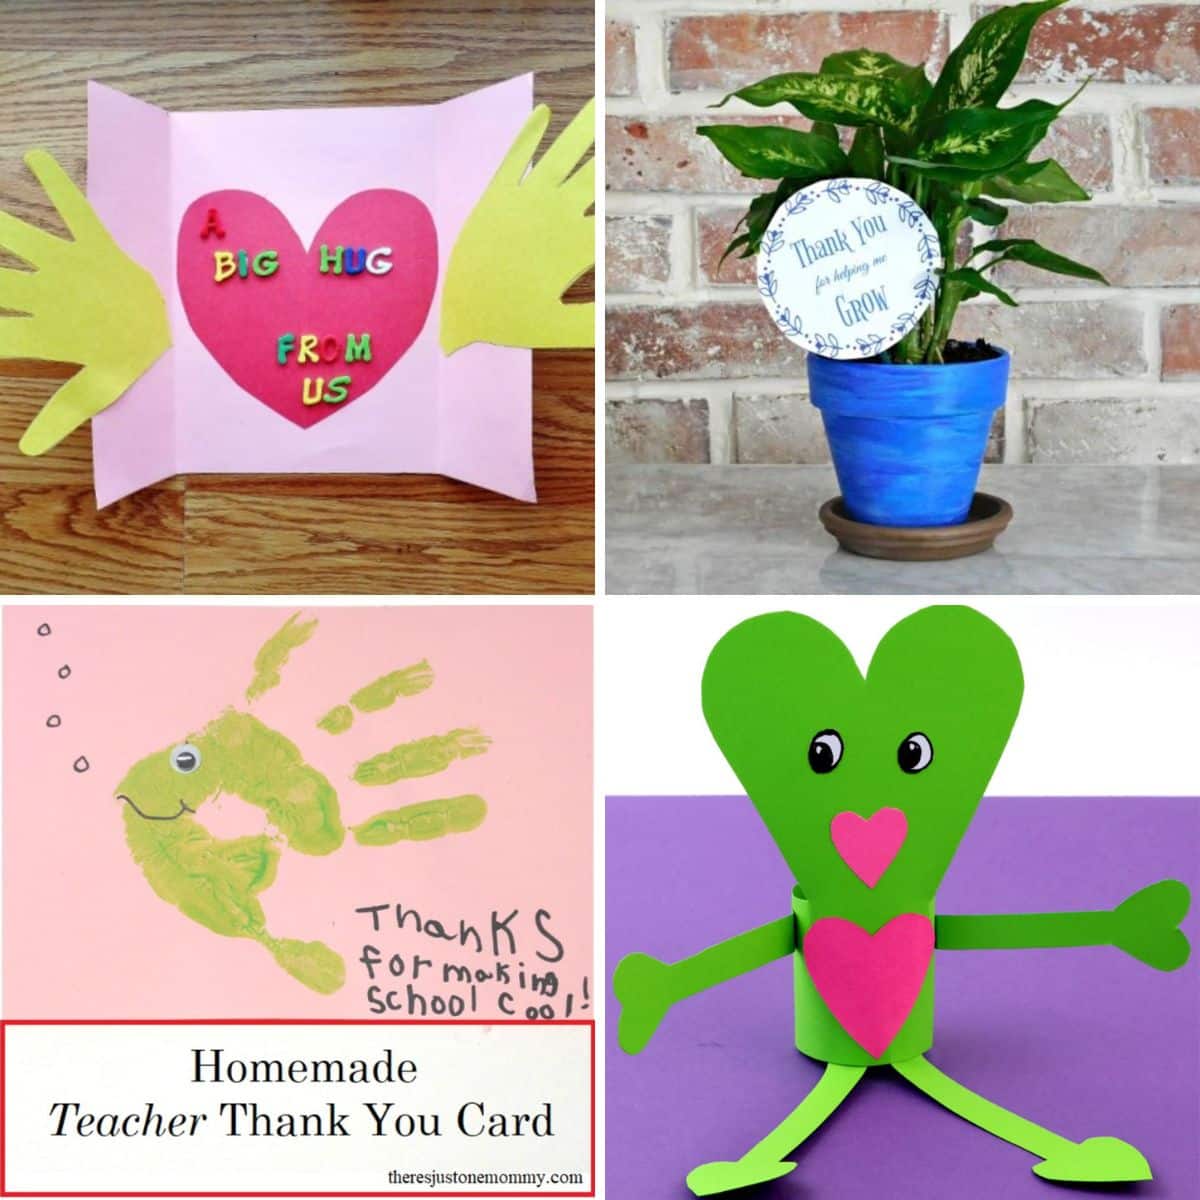 Last Minute DIY Teacher Gifts They'll LOVE! - Your Modern Family